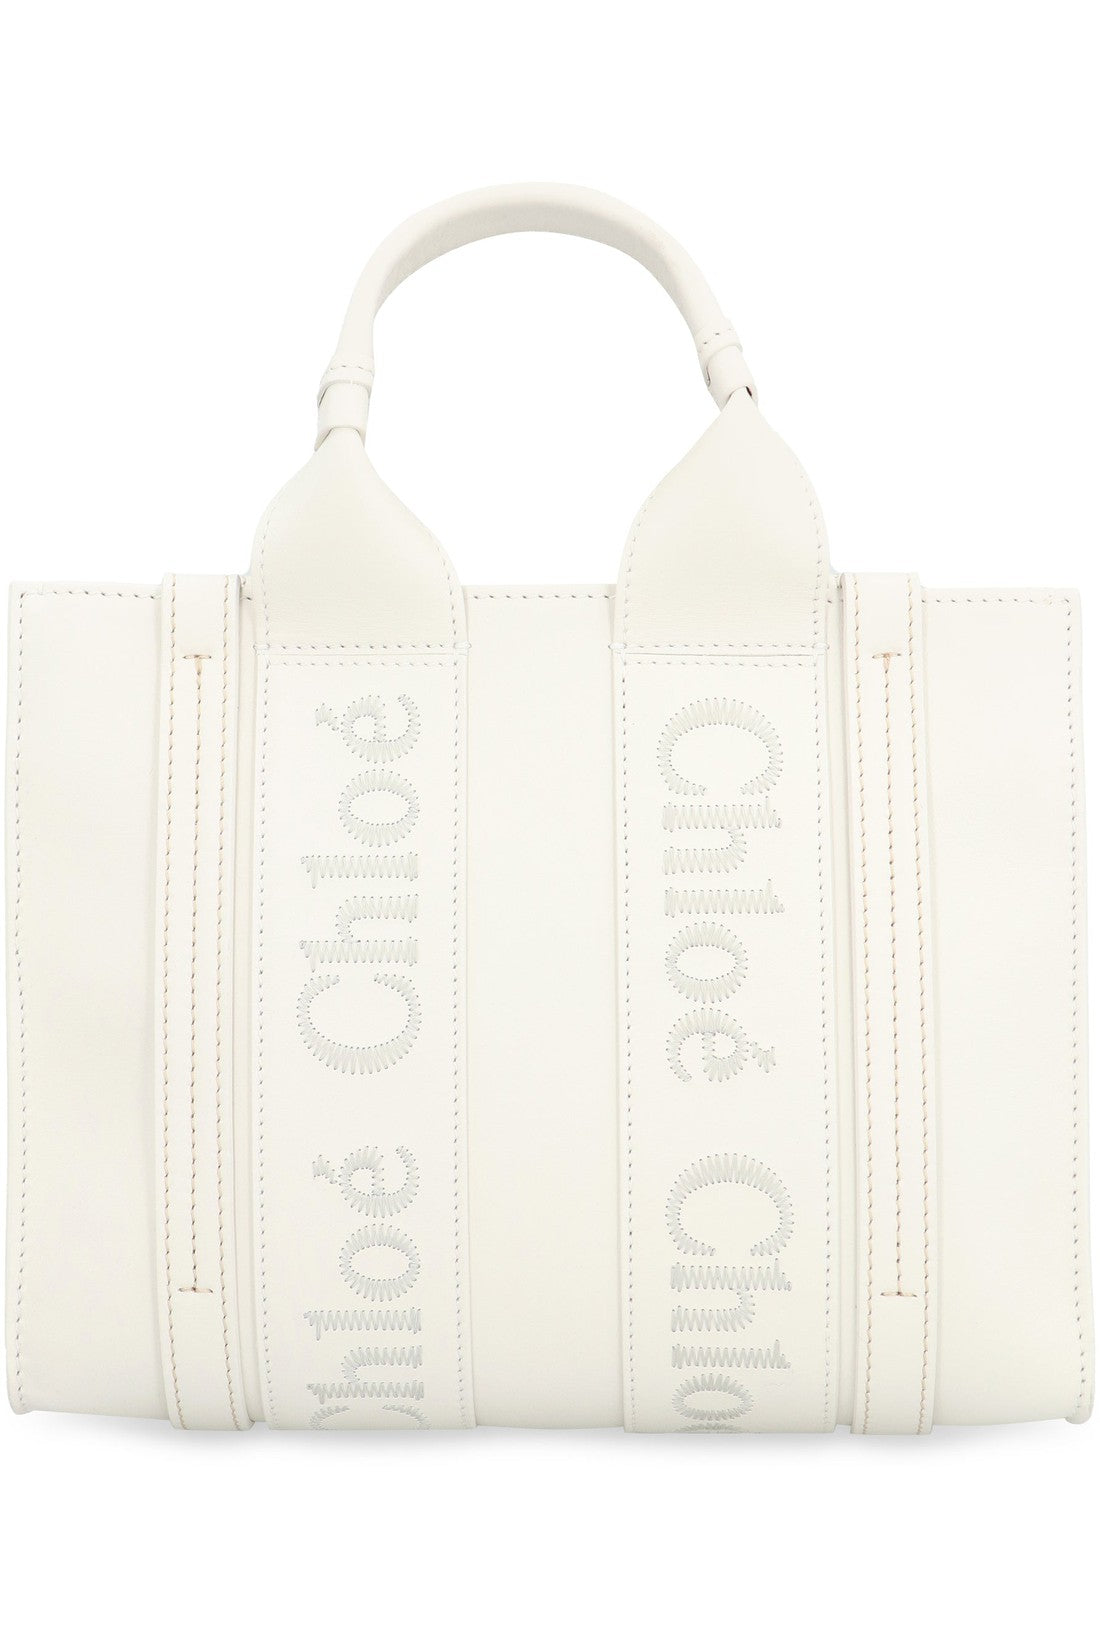 Chloé-OUTLET-SALE-Woody Smooth leather tote bag-ARCHIVIST